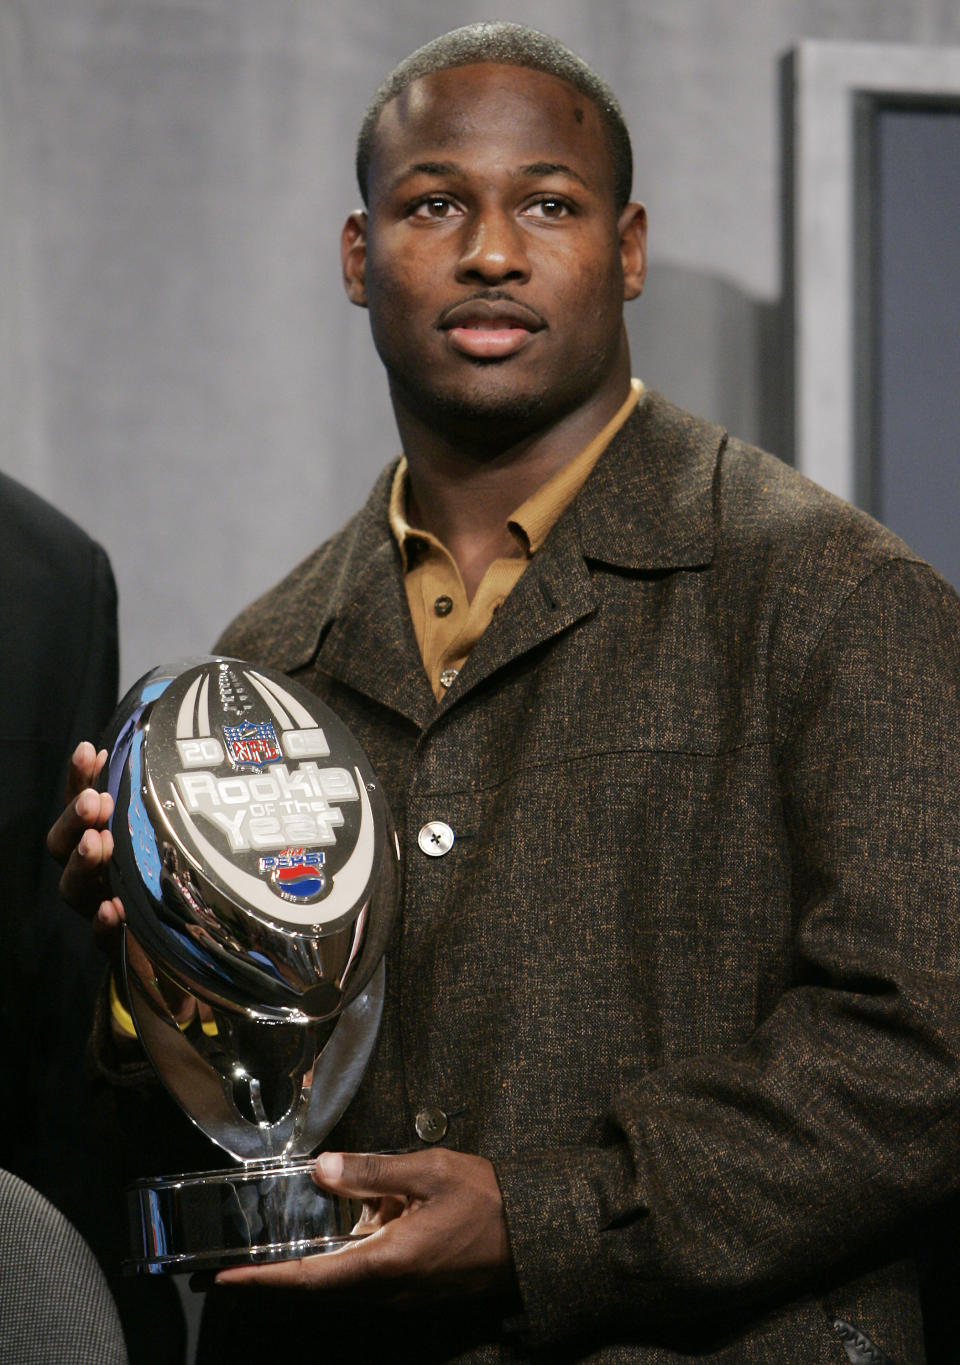 FILE - Tampa Bay Buccaneers running back Carnell "Cadillac" Williams holds his Rookie of the Year trophy during a press conference in Detroit, Thursday, Feb. 2, 2006. Carnell Williams was an All-American running back on Auburn's undefeated team in 2004. Now, the former NFL rookie of the year is running the show. Williams is serving as Auburn's interim coach for the last four games, starting Saturday at Mississippi State. He replaces Bryan Harsin, who was fired Monday, Oct. 31, 2022, after going 9-12 with the Tigers. (AP Photo/Paul Sancya, File)